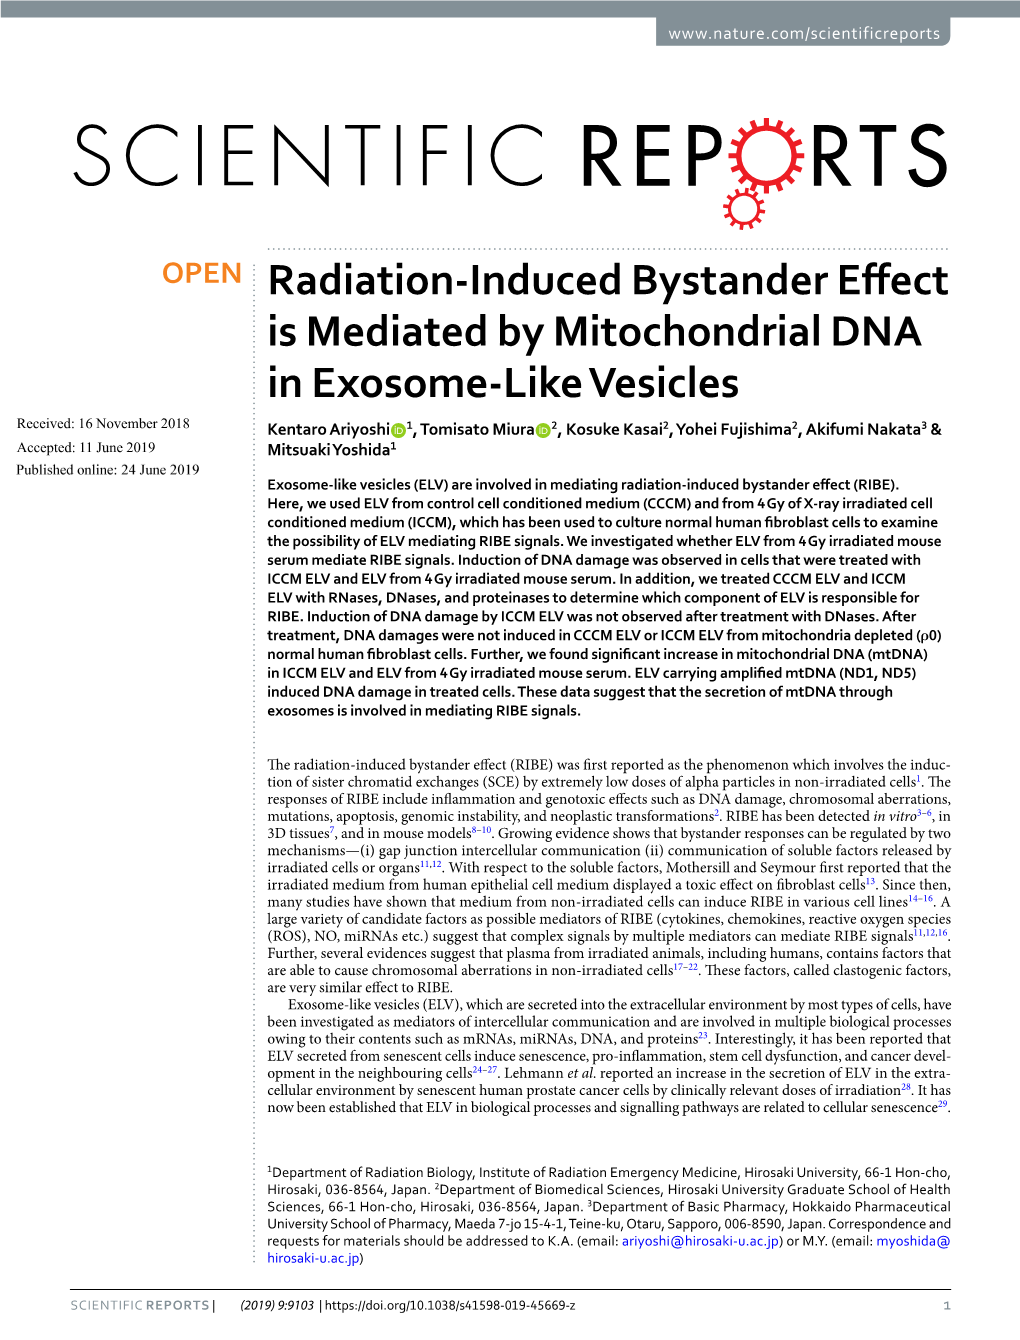 Radiation-Induced Bystander Effect Is Mediated by Mitochondrial DNA In